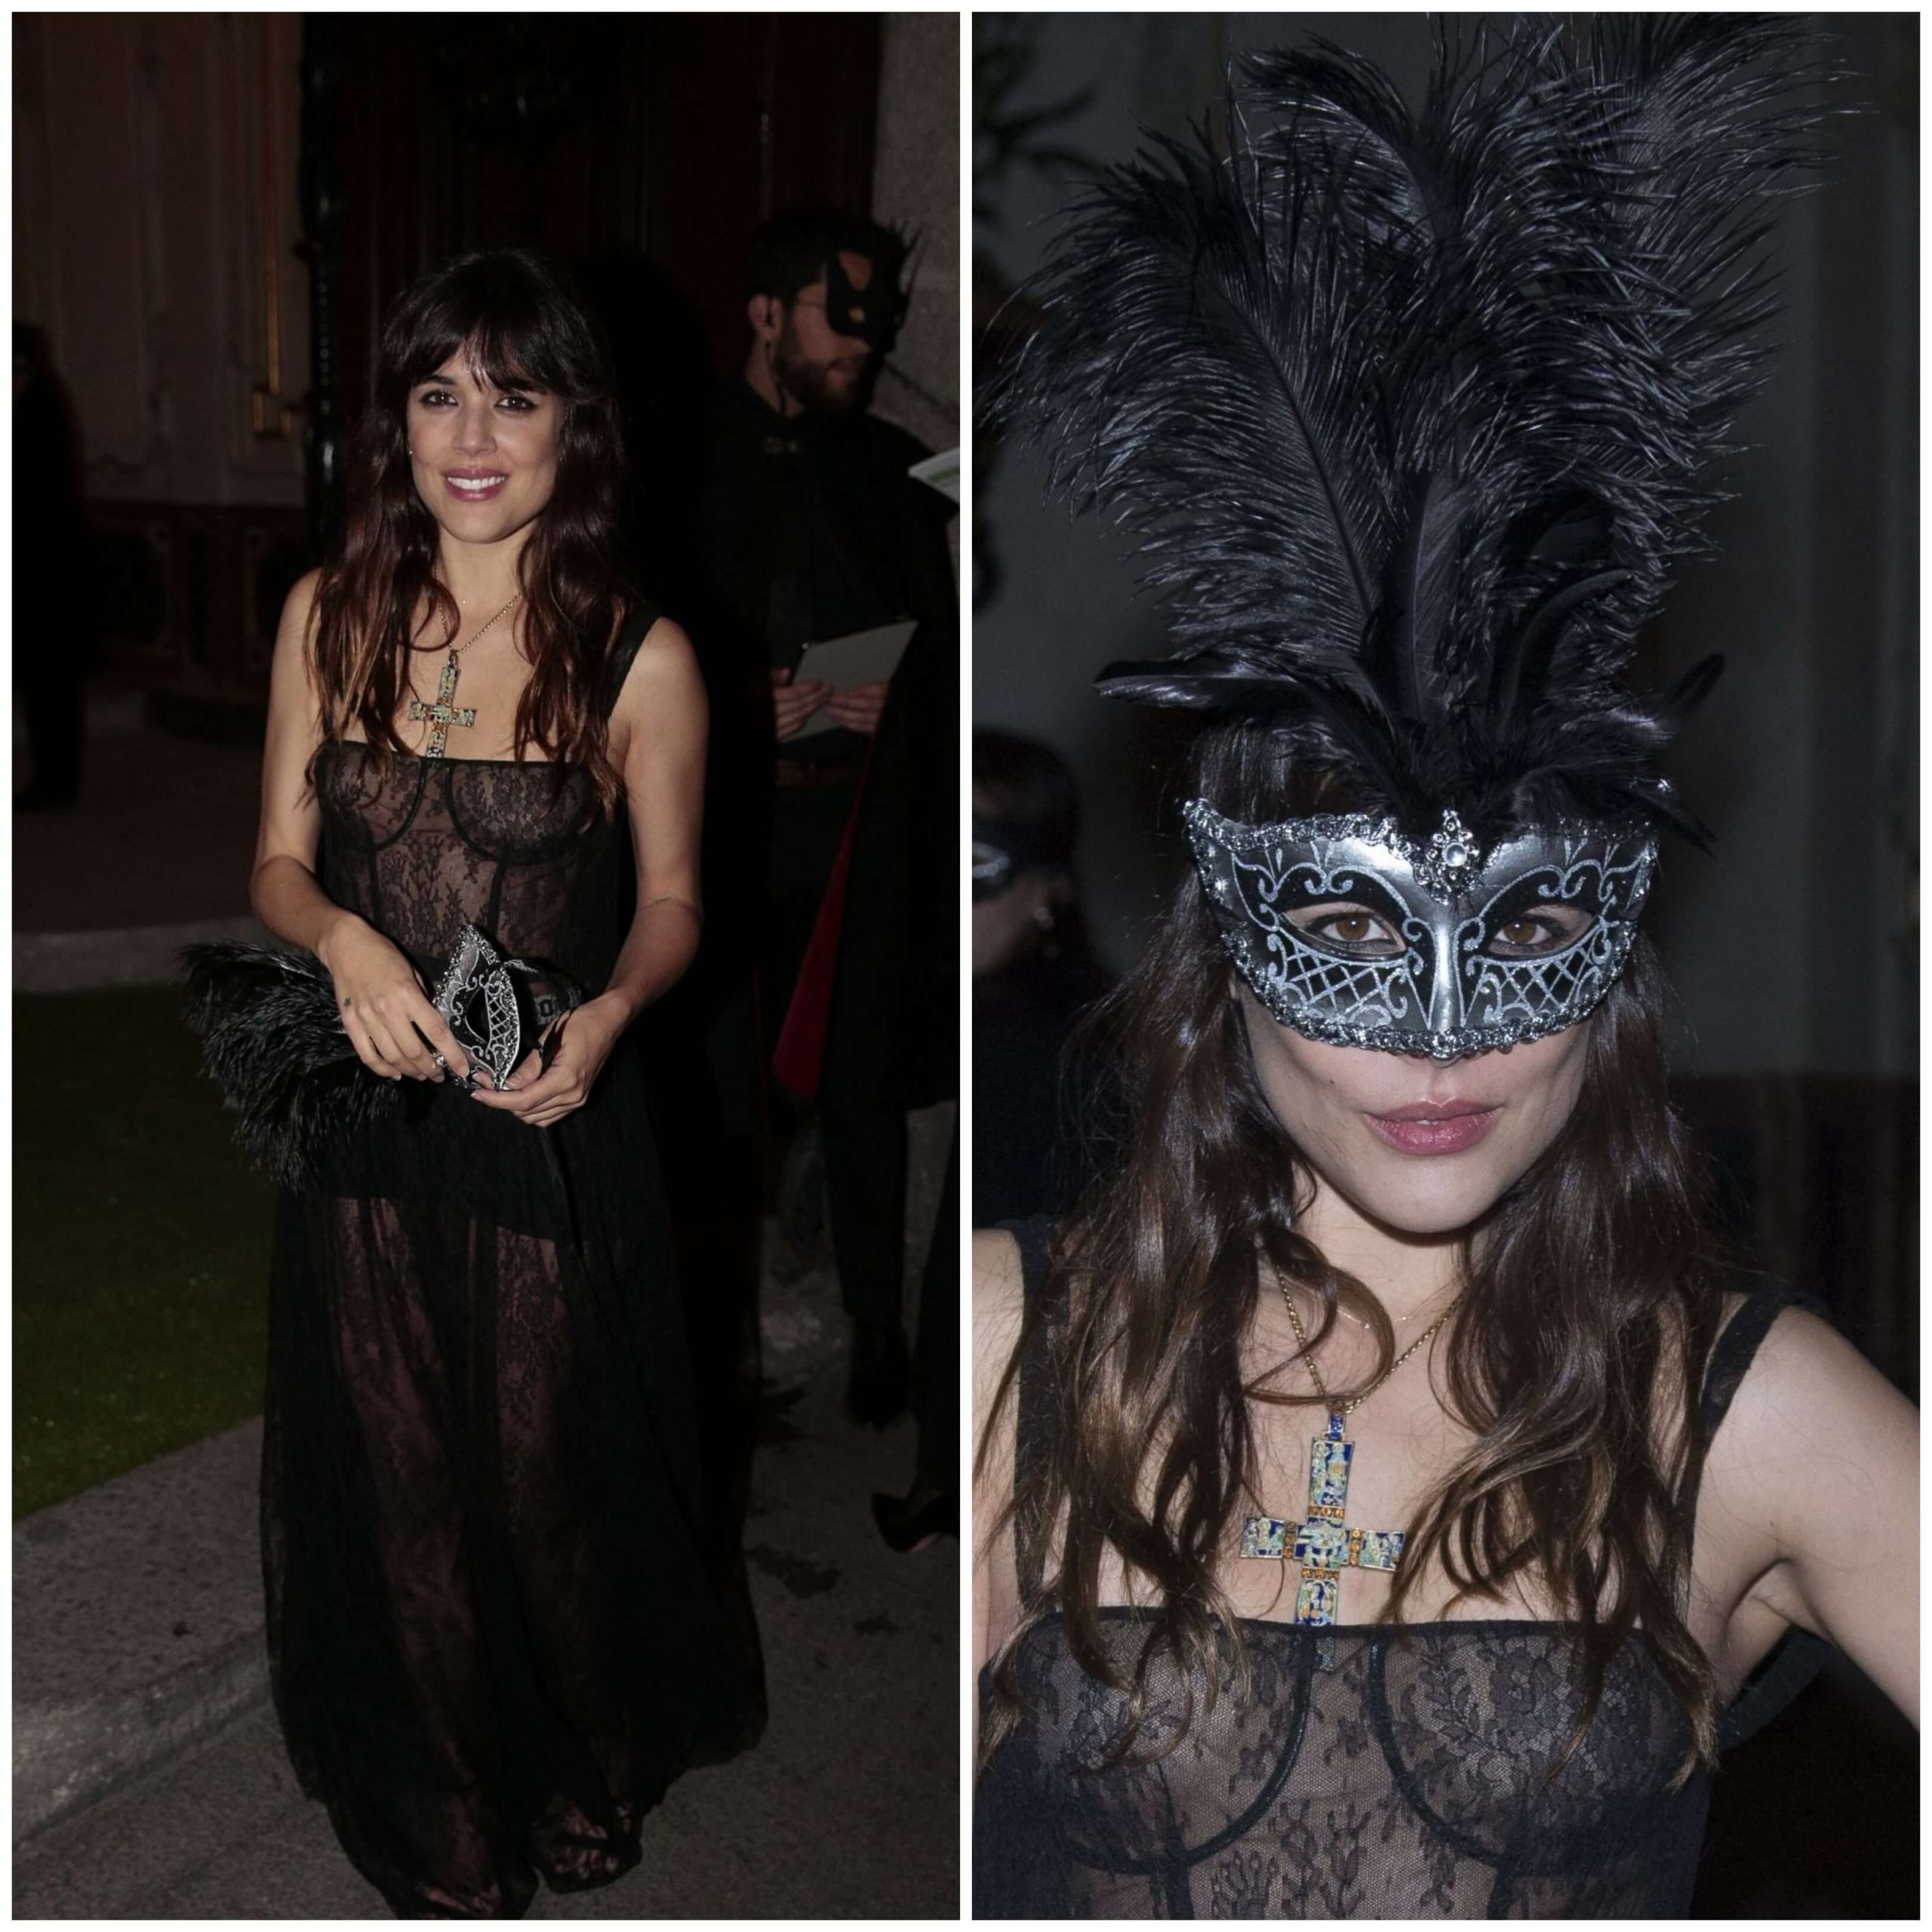 Adriana Ugarte Sexy & Chic Look In Black Sheer Gown At Dior Party